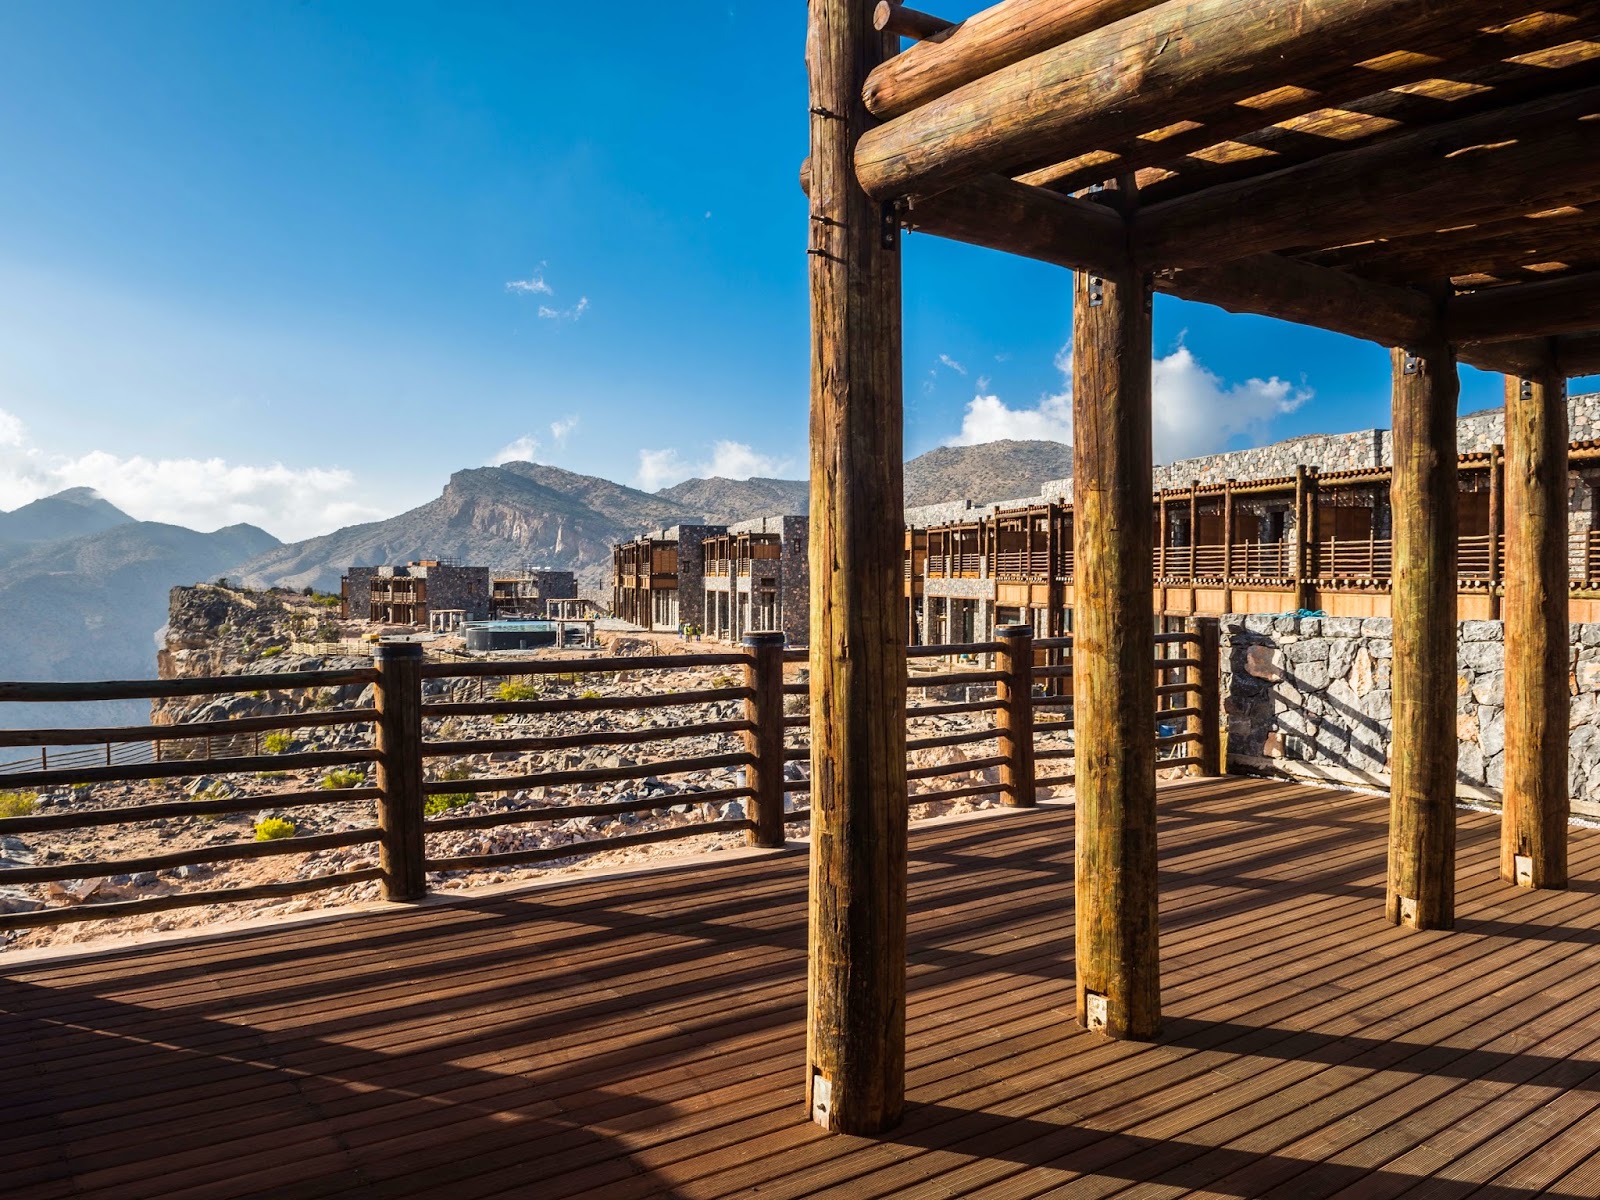 wooden terrace, blue skies and mountain views